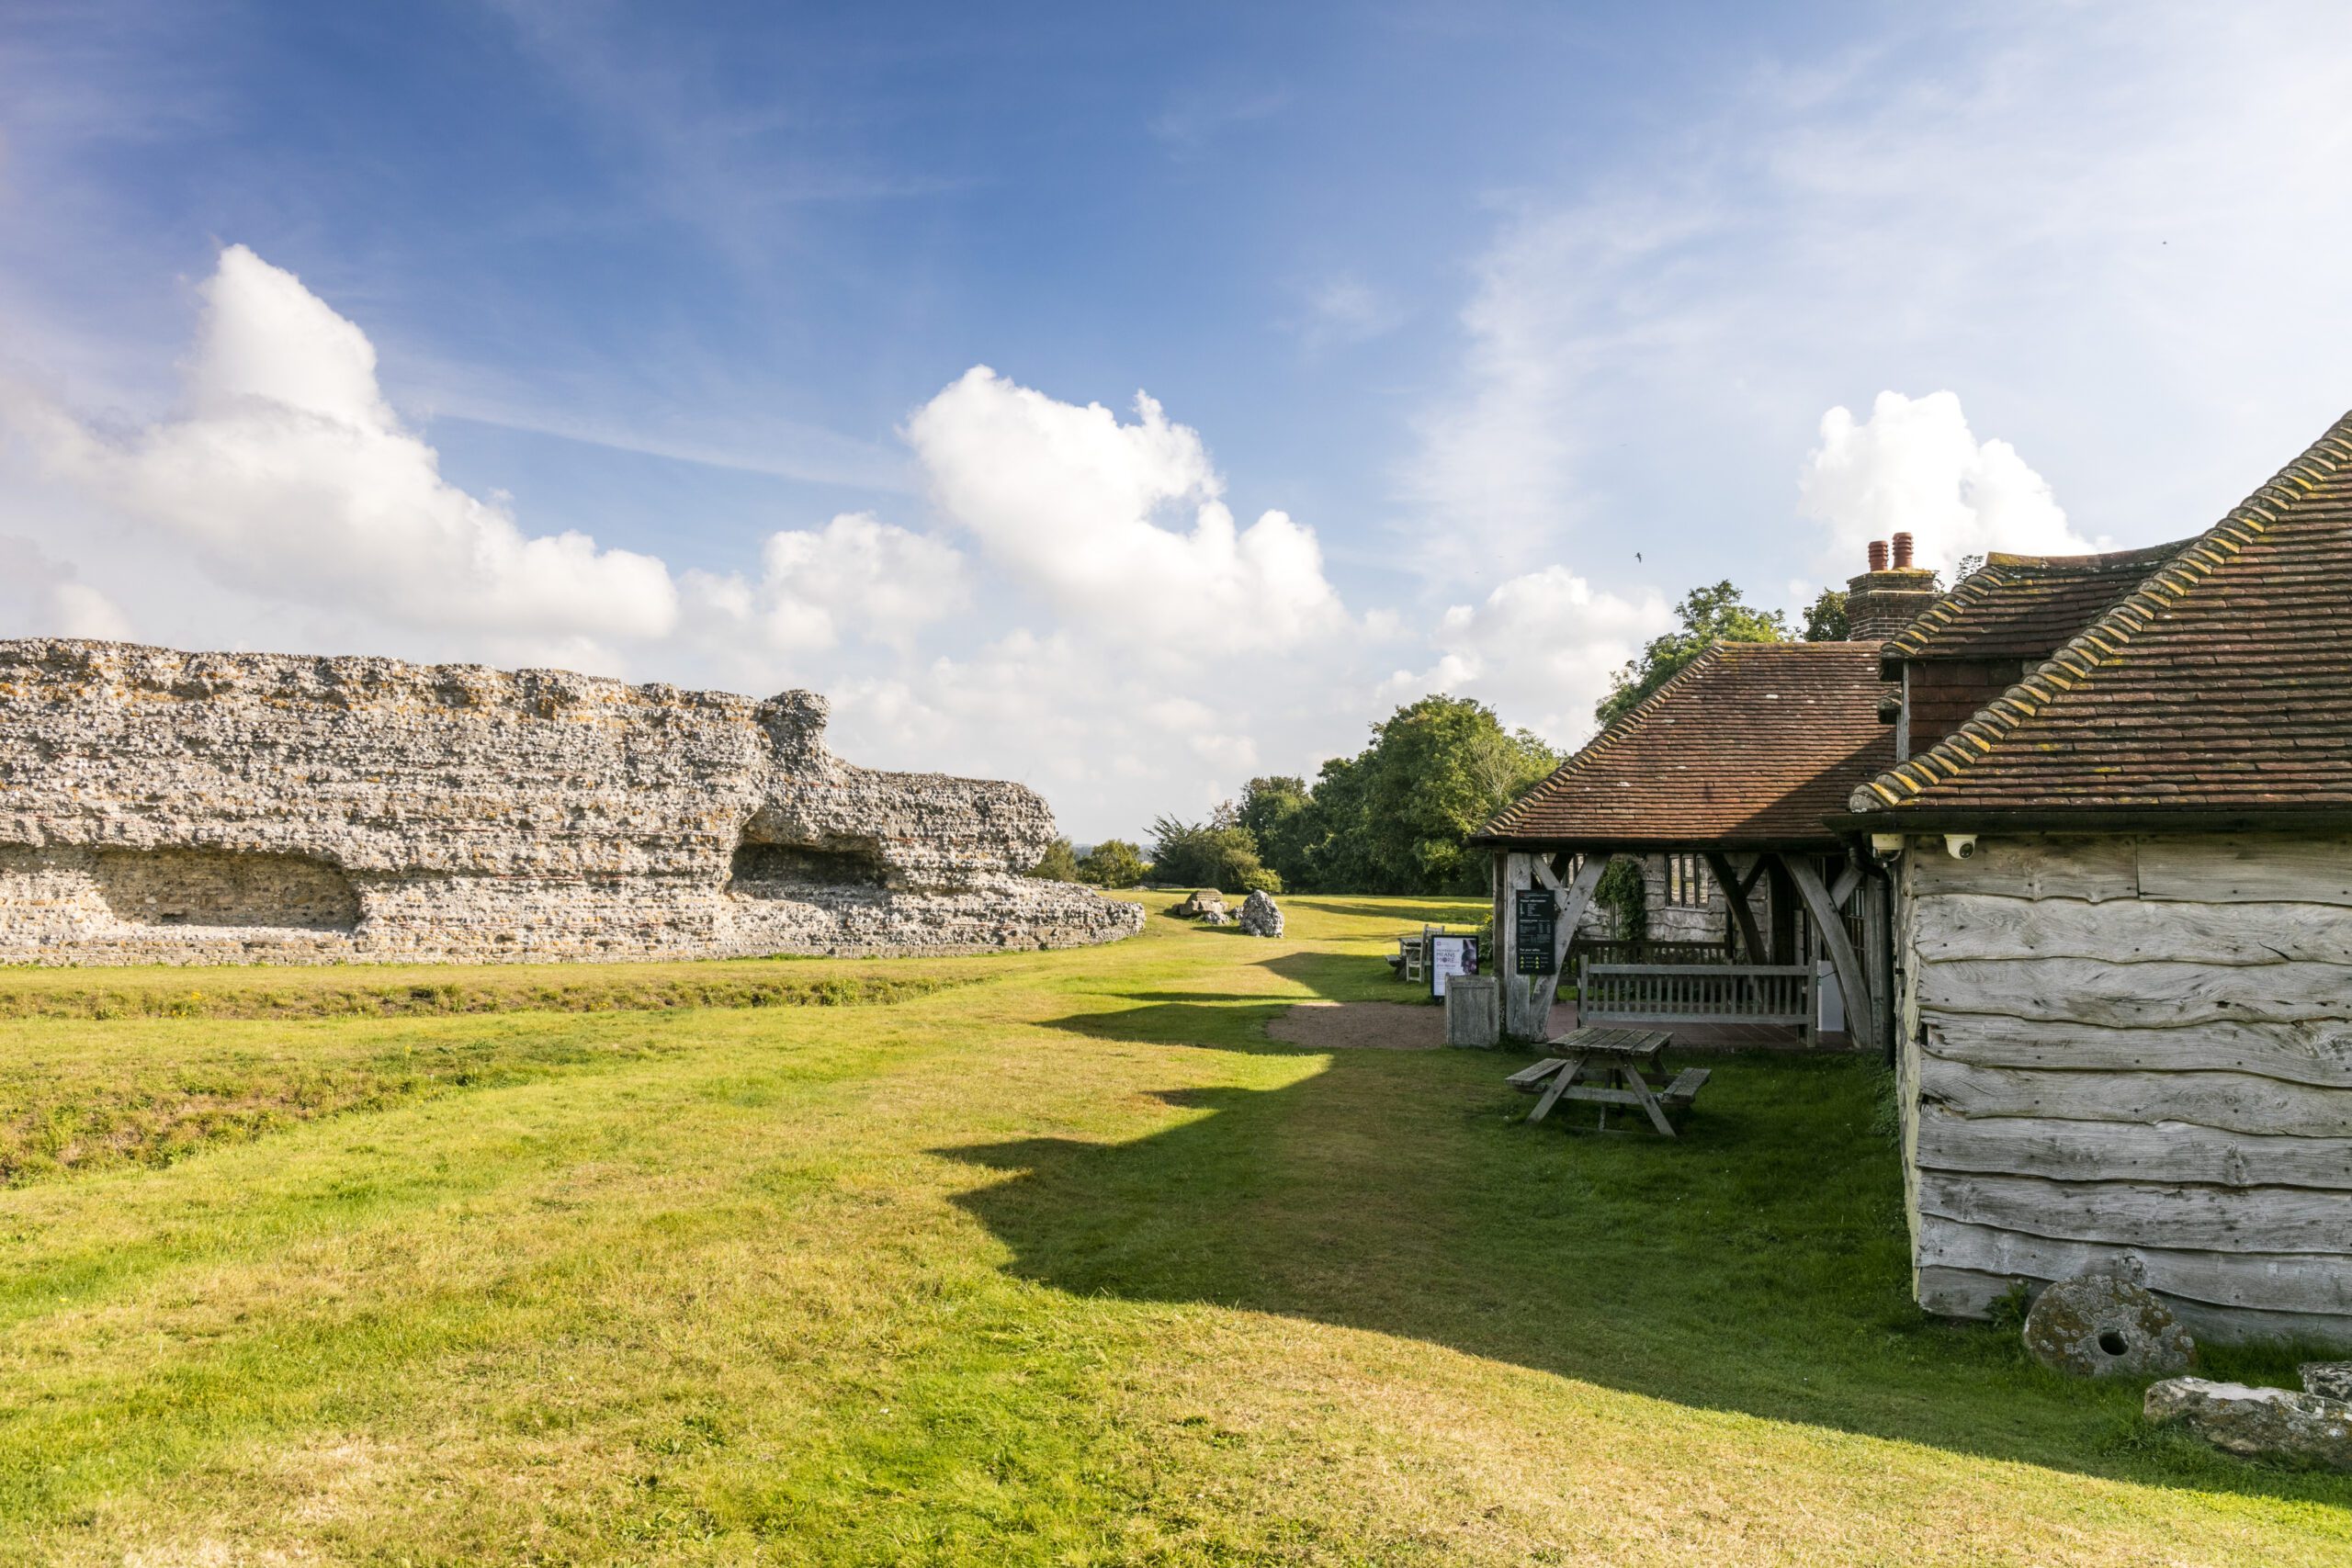 Richborough Roman Fort on a sunny day.